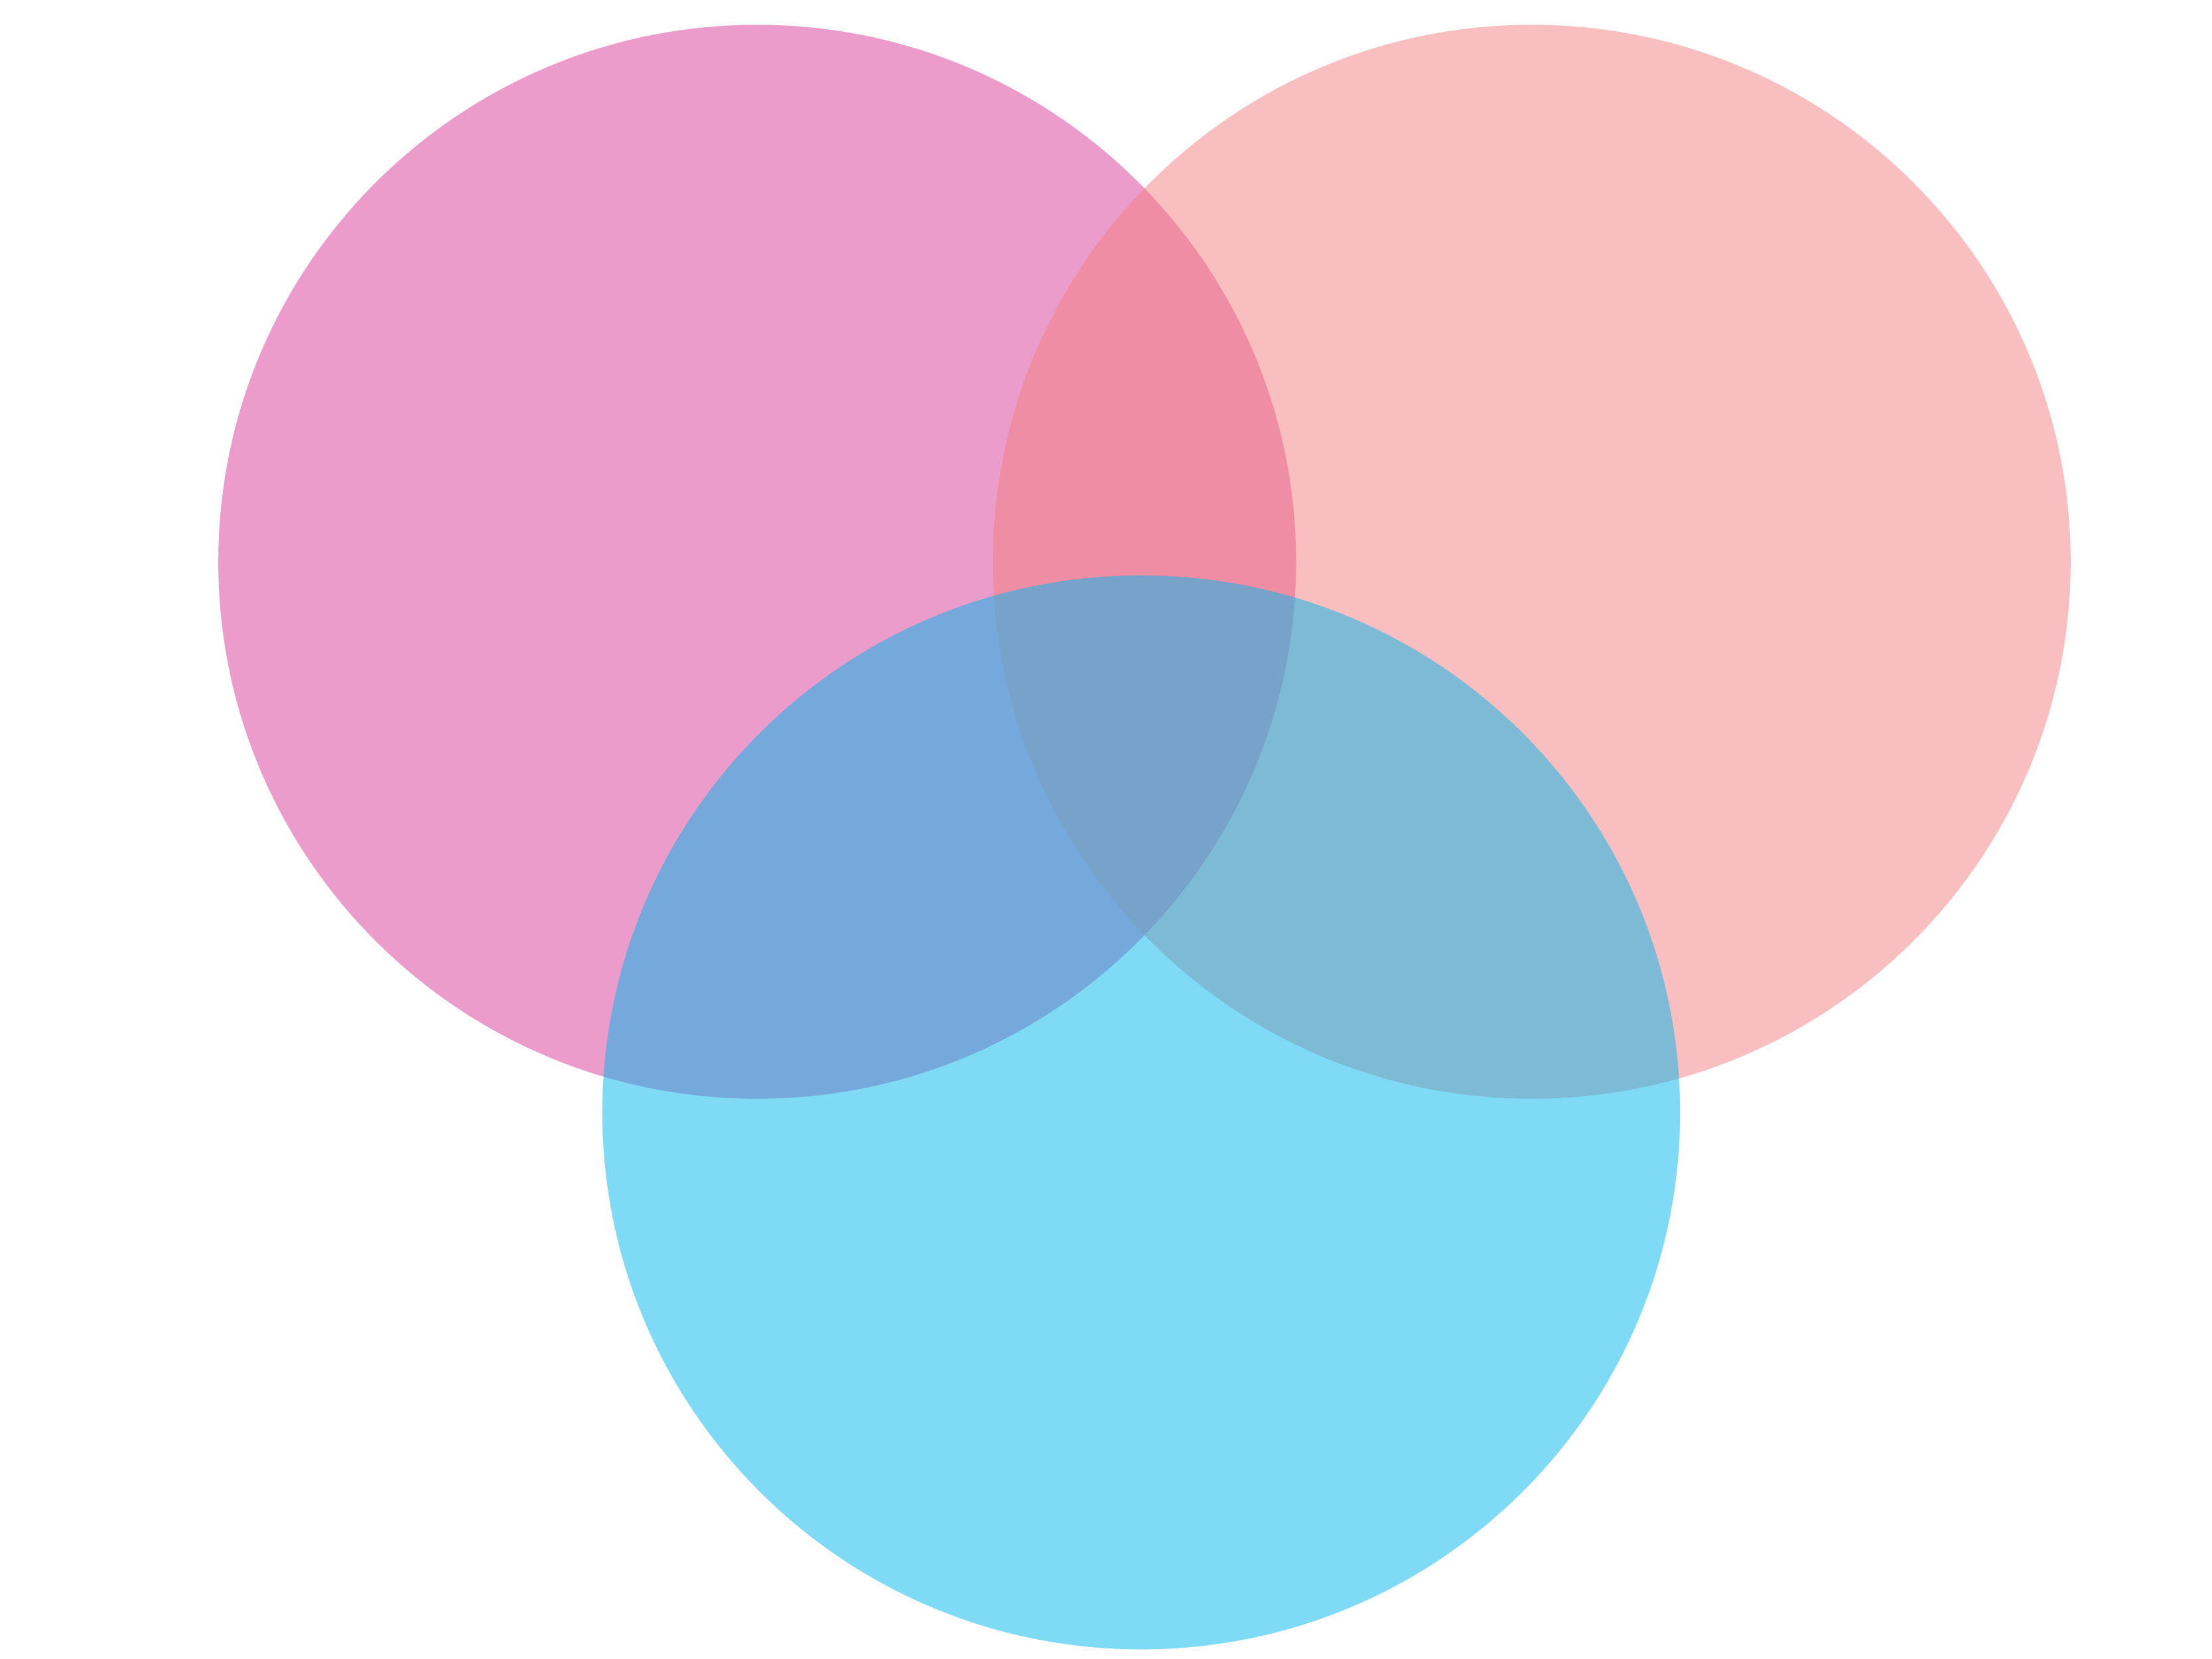 Intersection of 3 circles